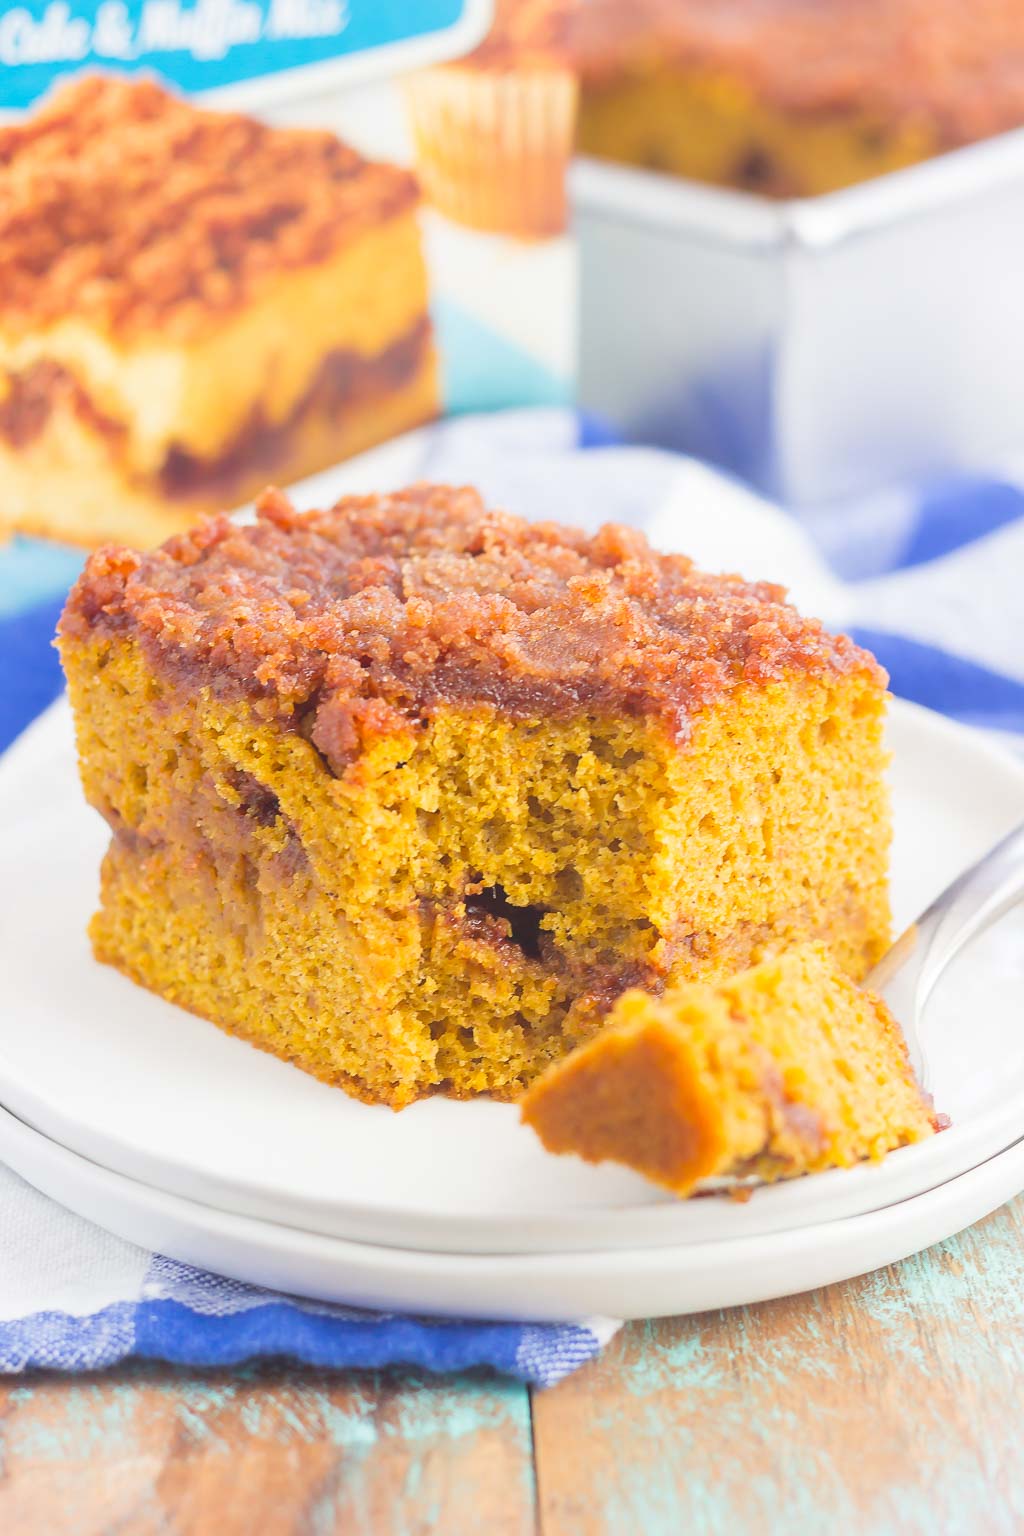 This Gluten Free Pumpkin Cinnamon Crumb Cake requires just a few ingredients and is ready in no time. Fluffy pumpkin cake is swirled with a sweet cinnamon streusel and then baked until golden. This easy cake is perfect to serve at all of your holiday gatherings! #cake #pumpkincake #crumbcake #glutenfree #glutenfreecake #glutenfreepumpkincake #pumpkincrumbcake #pumpkinrecipes #pumpkindessert #dessert